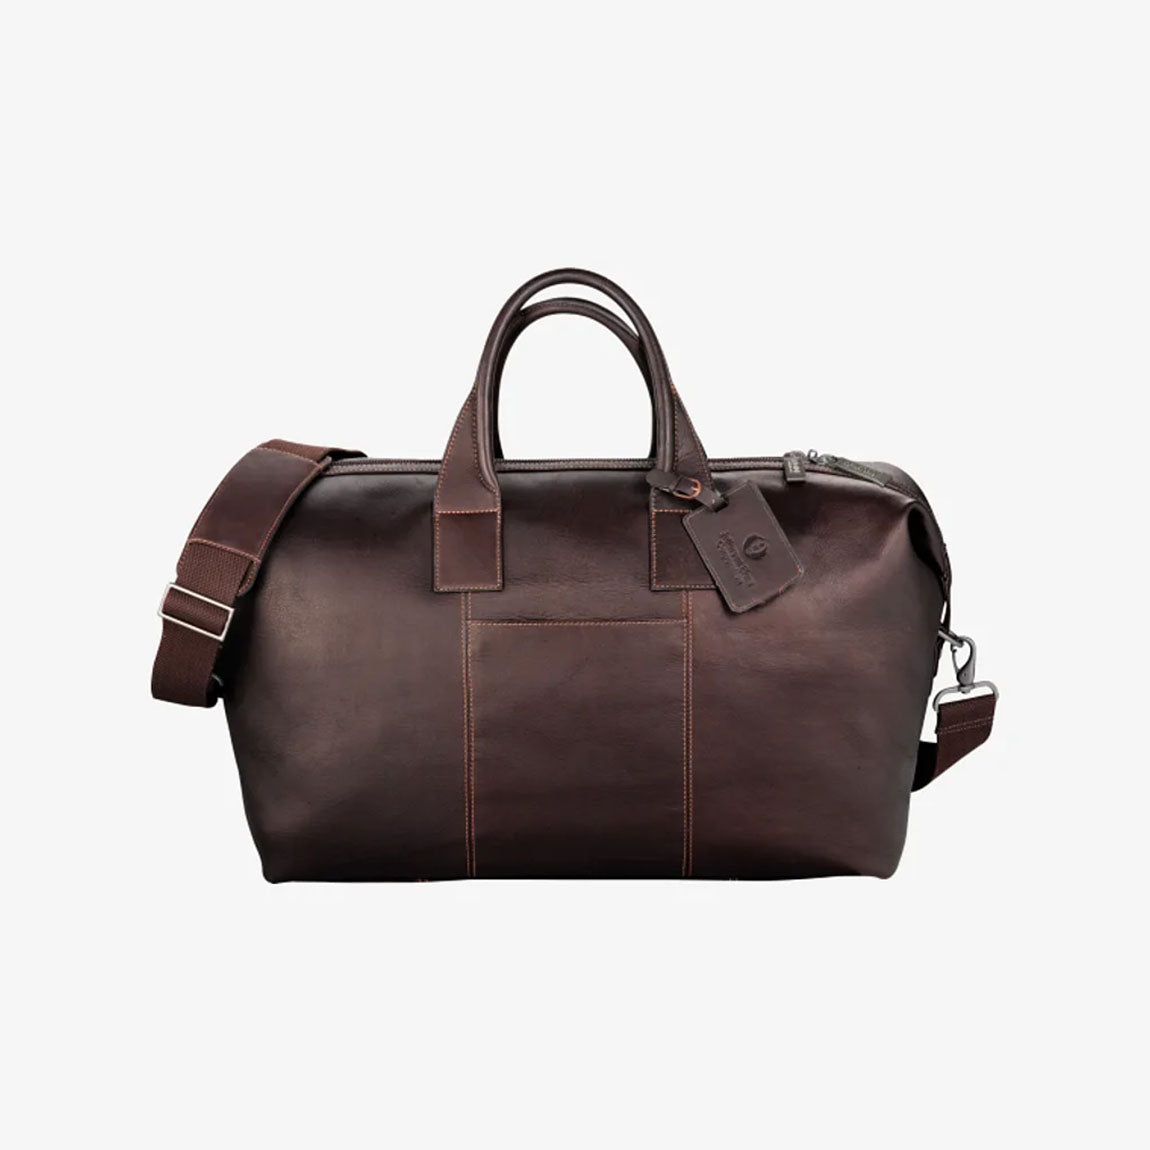 Kenneth Cole® Colombian Leather 22" Duffel